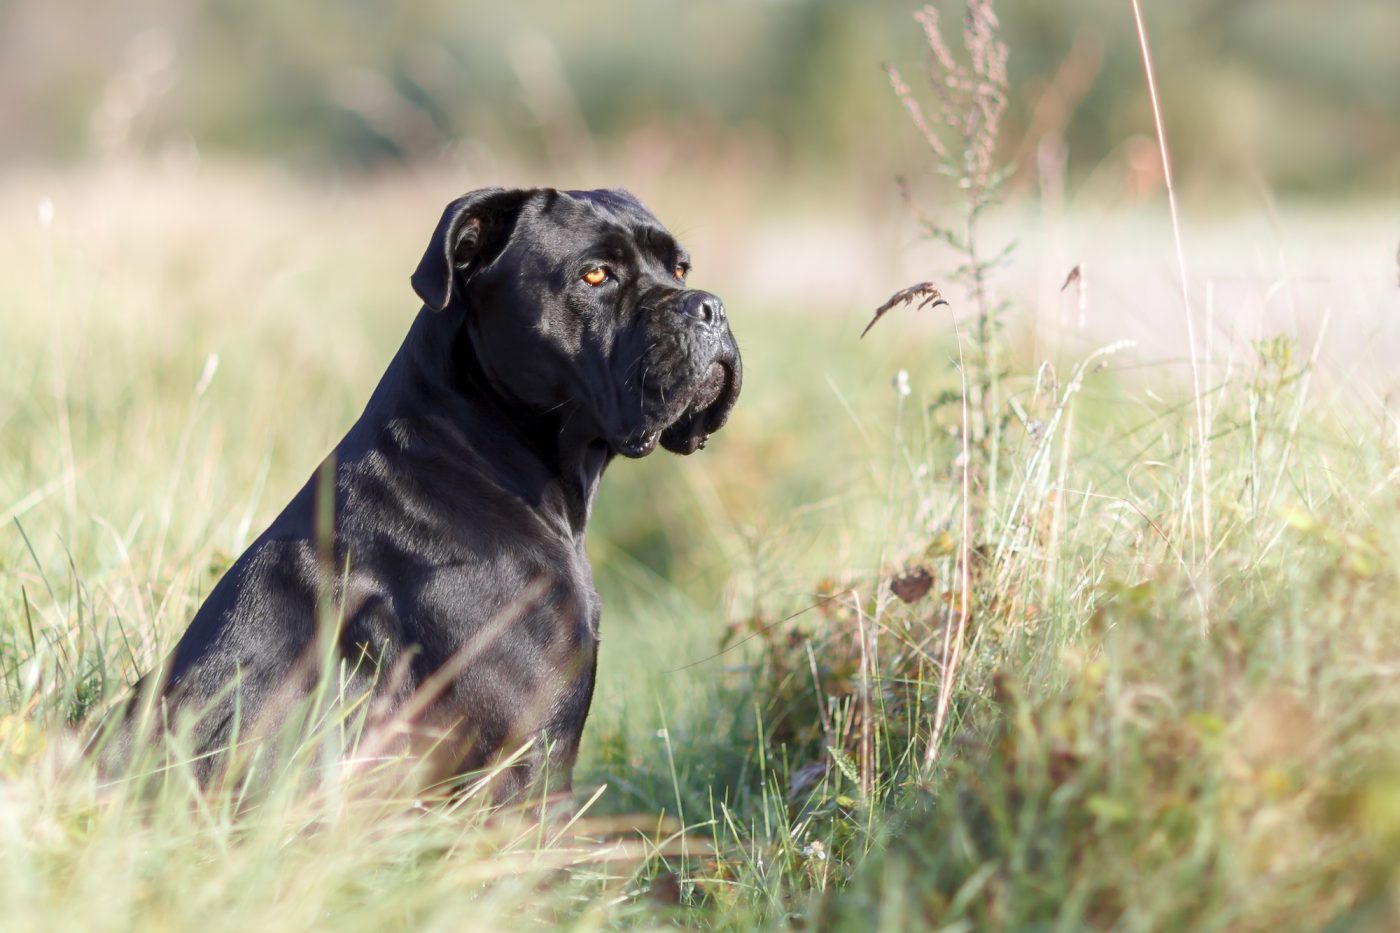 Everything You Need To Know About The Fastest Growing Dog Breed: The A